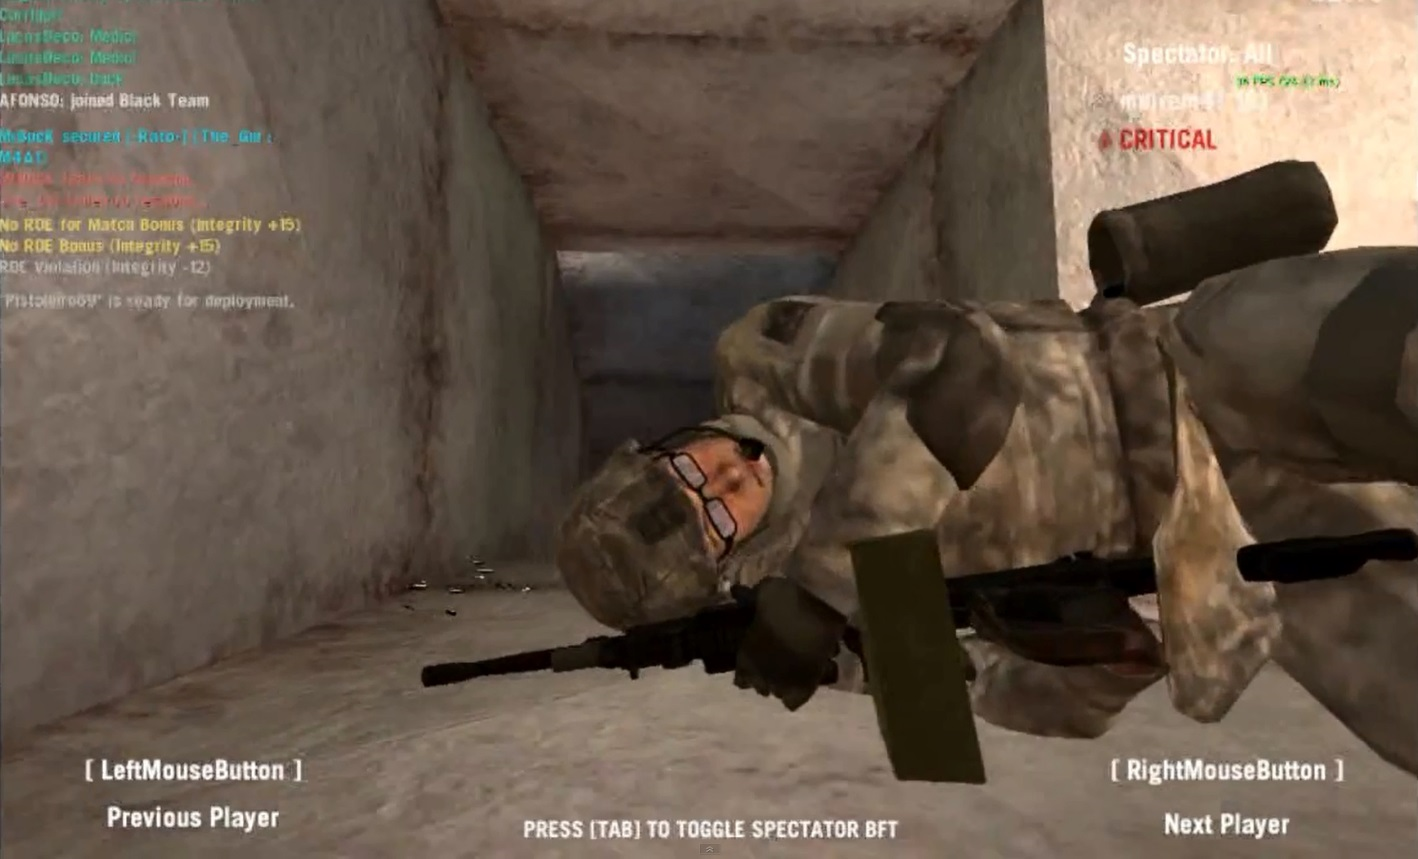 Screen shot from the video game America's Army 3, showing a fallen soldier